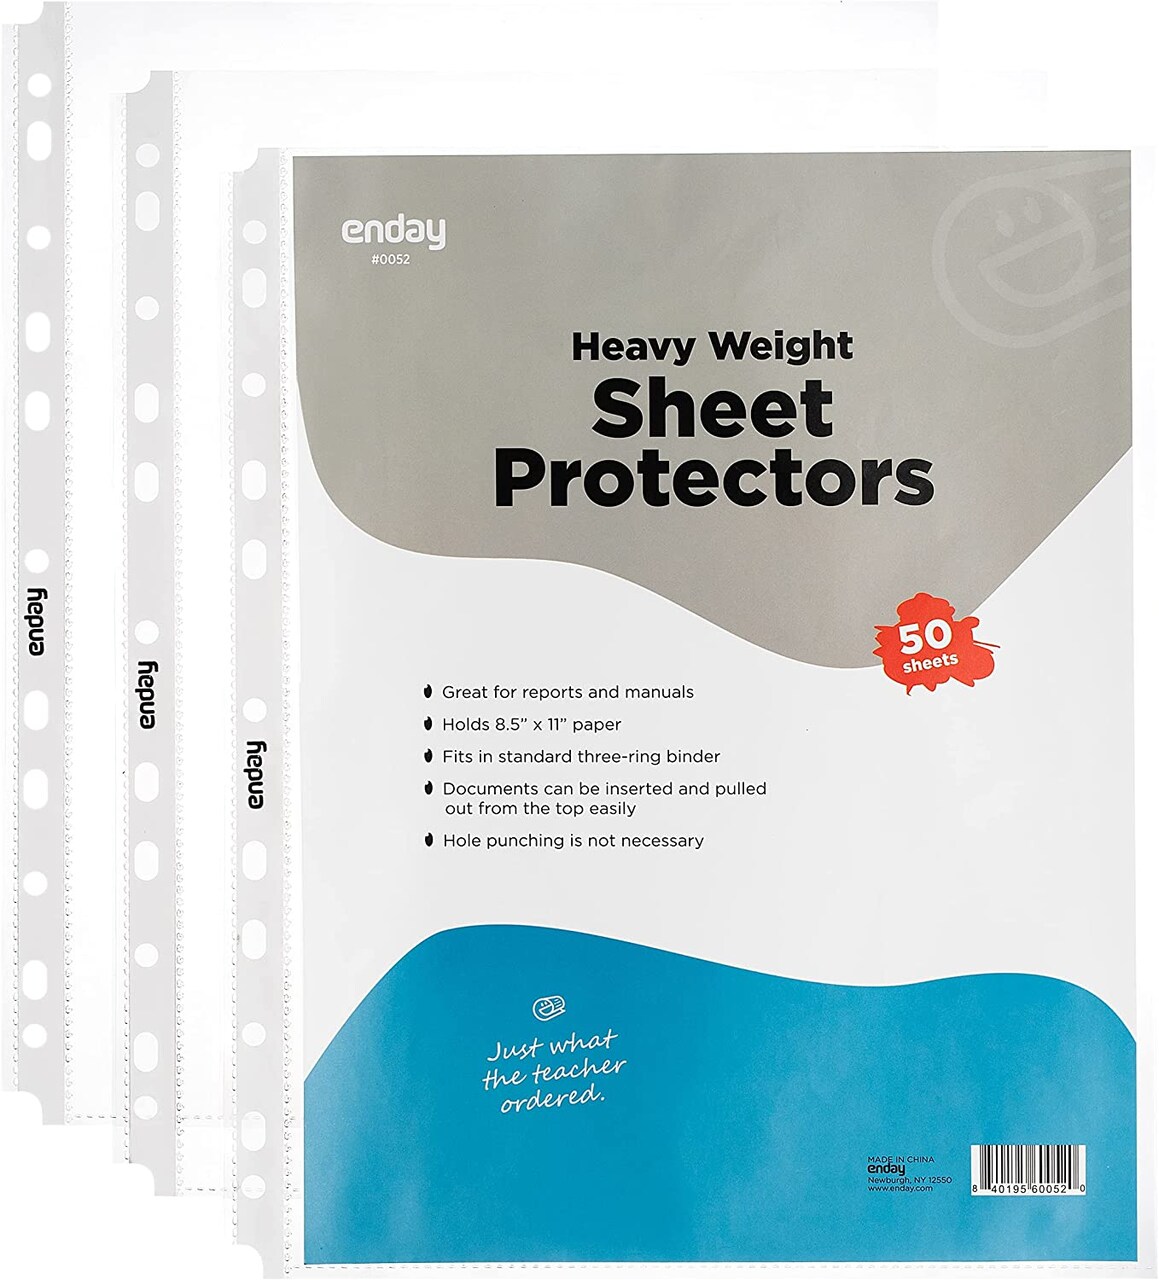 Enday Heavy Weight Top Loading Sheet Protectors (50/Pack)